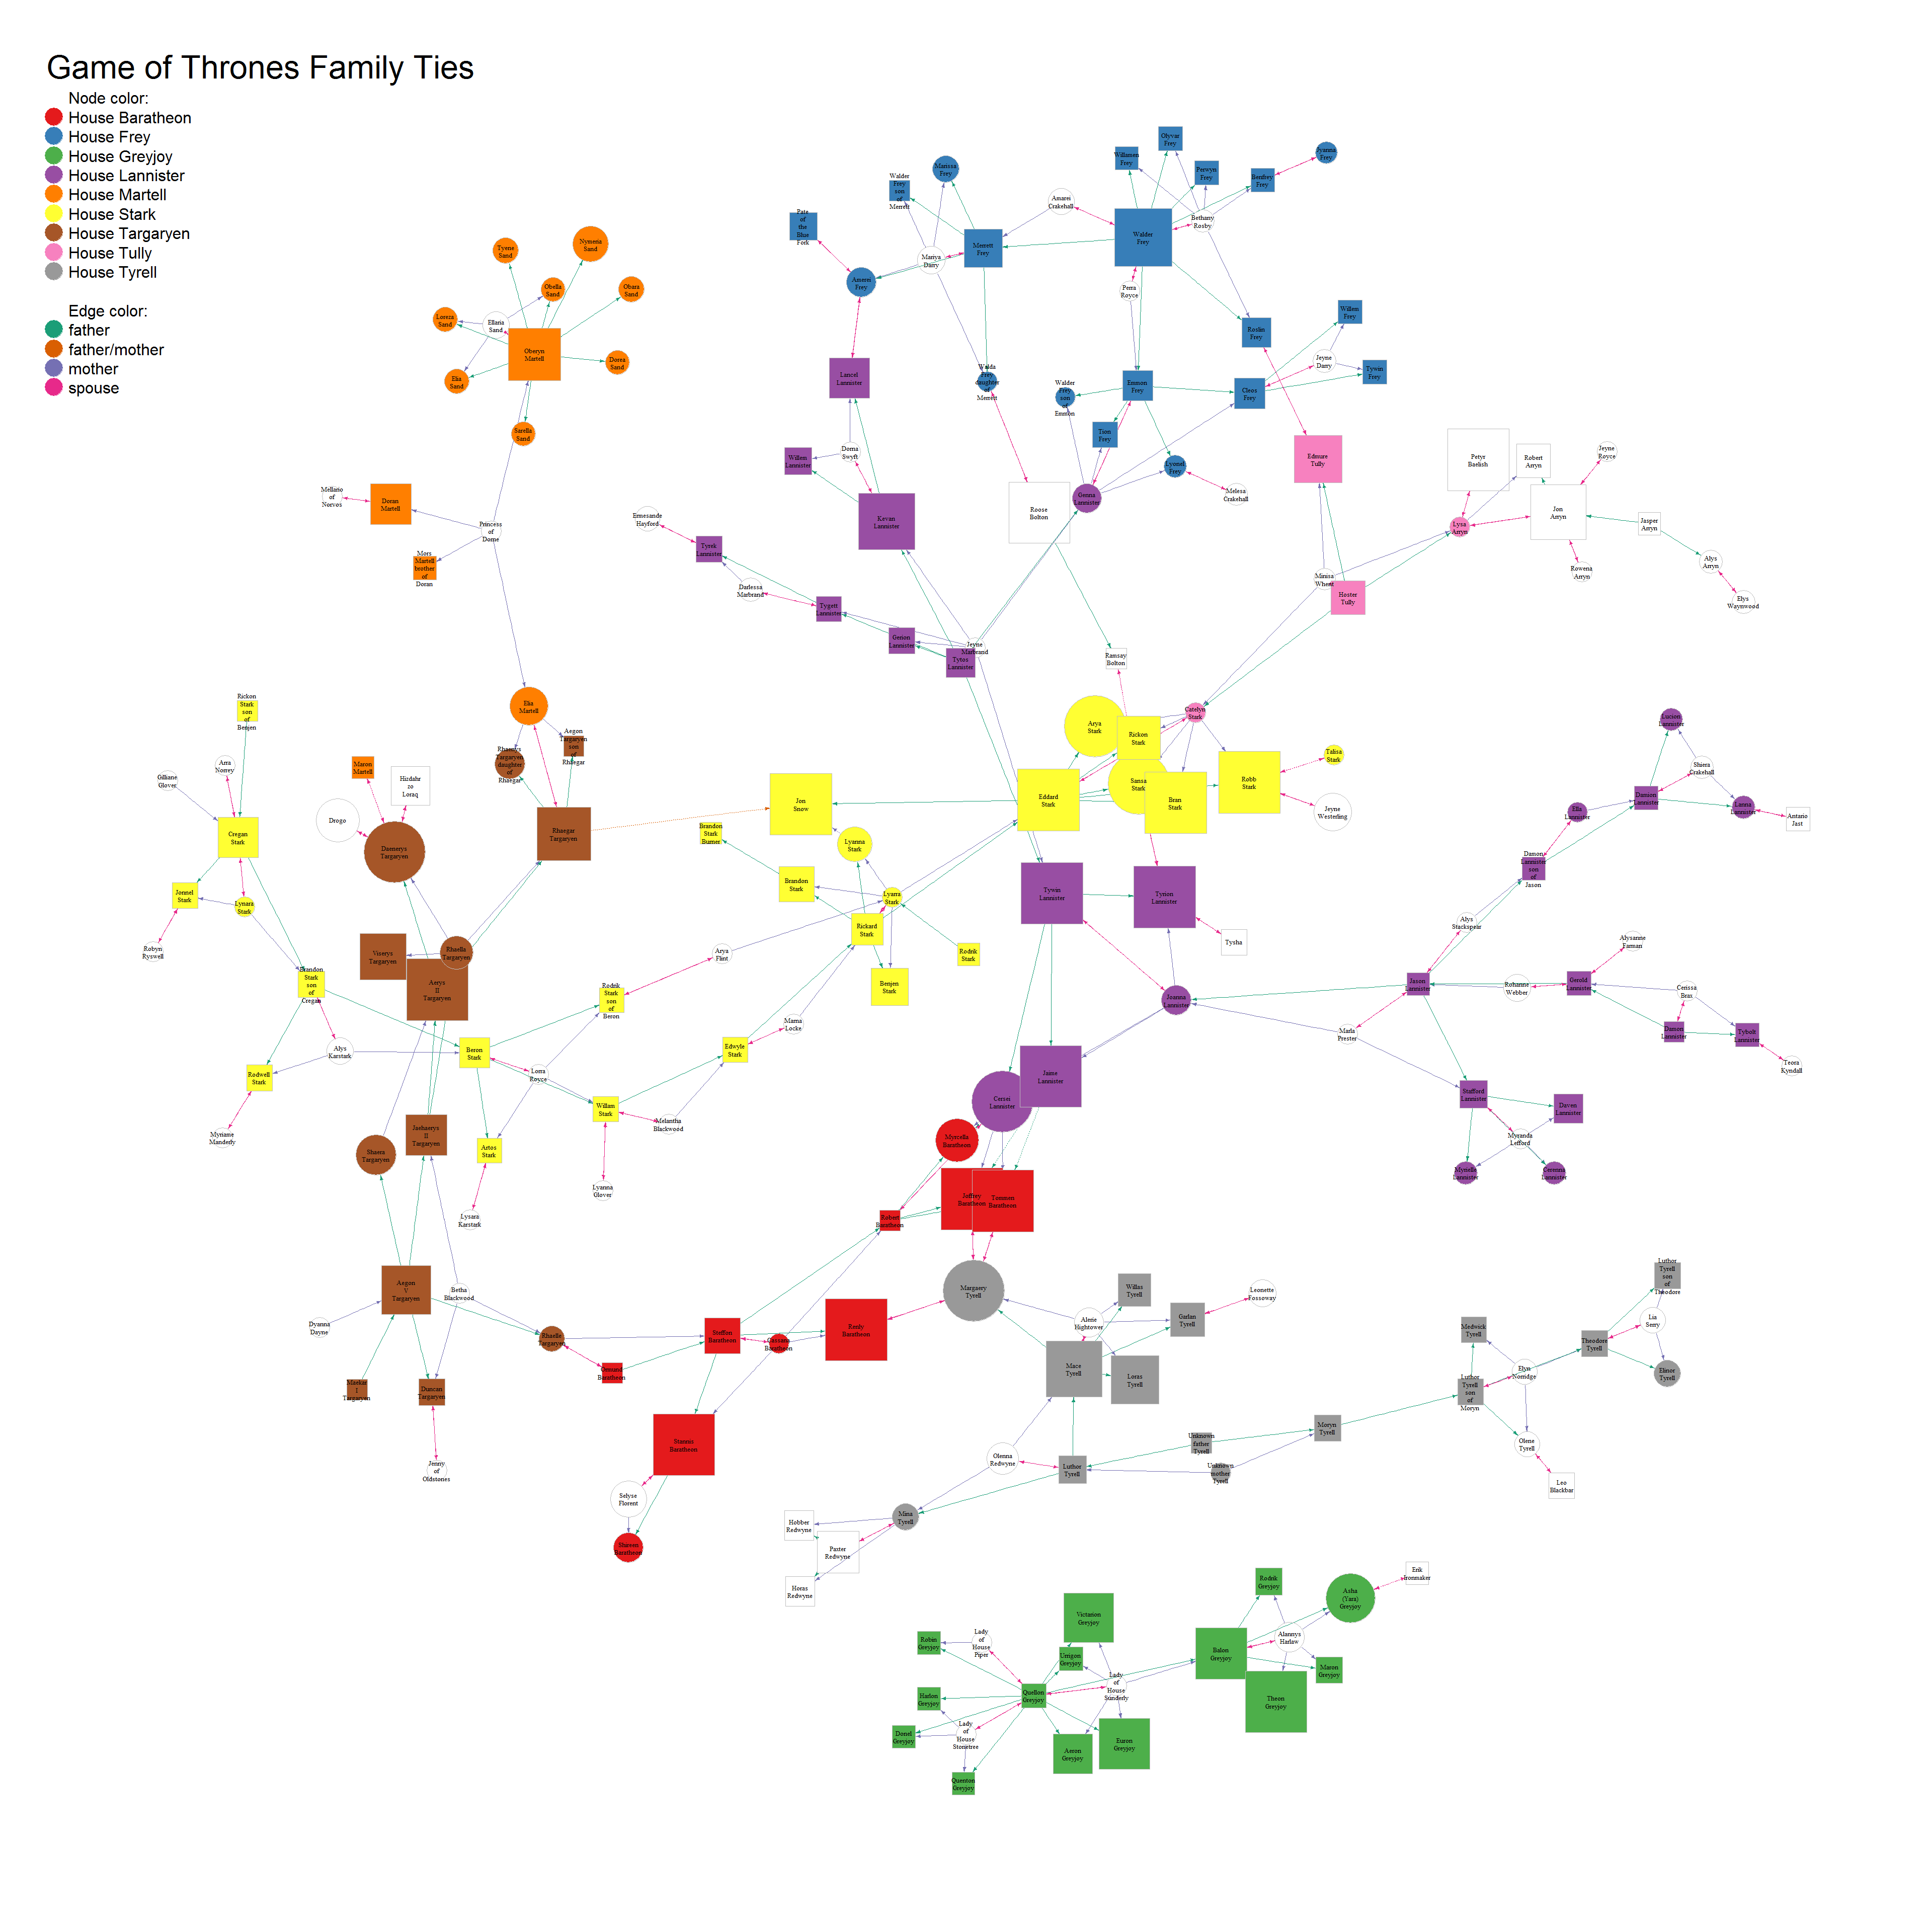 Network Analysis Of Game Of Thrones Family Ties